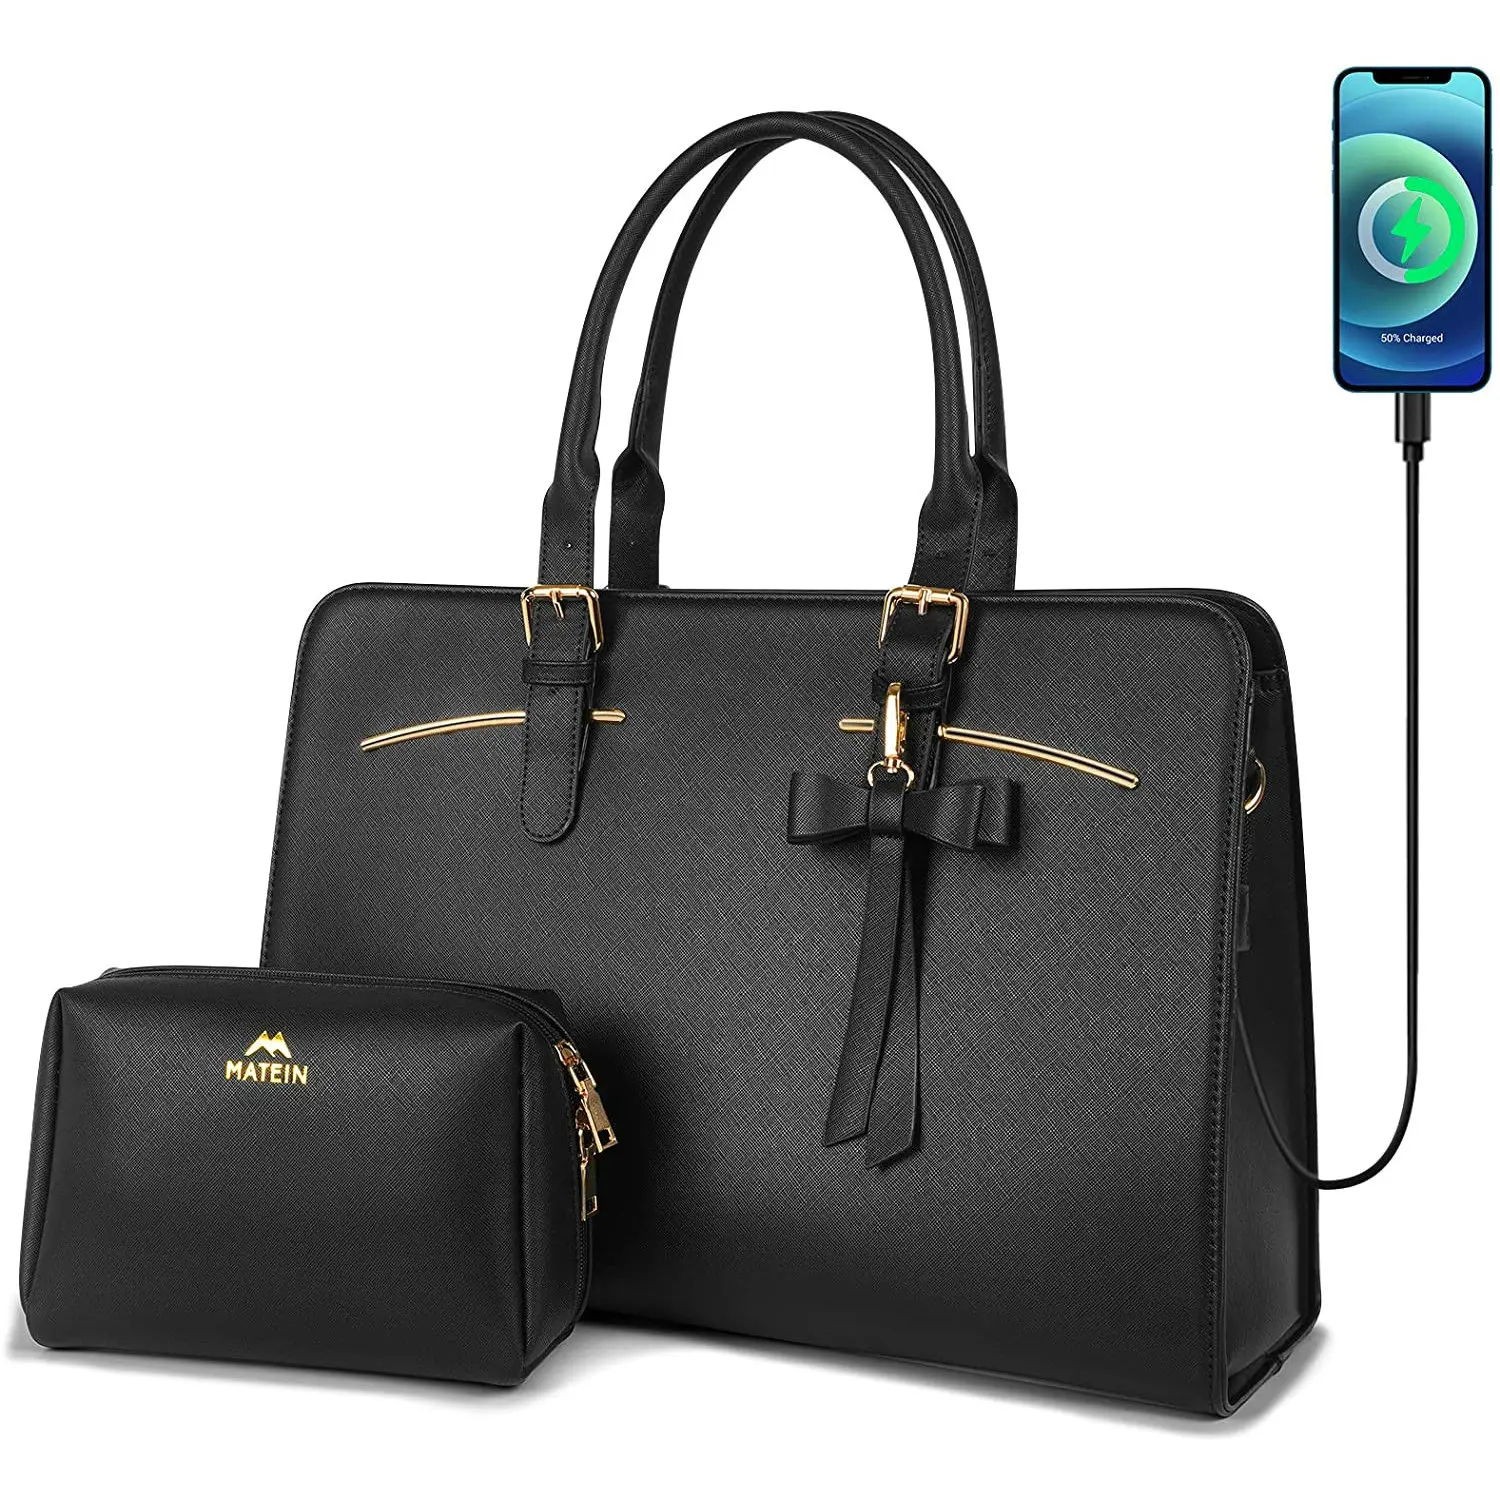 15.6 inch Laptop Handbags Office Hand Bag Ladies Large Shoulder Satchel Bags PU Leather Women Briefcase Laptop Bags with USB (1600447253503)